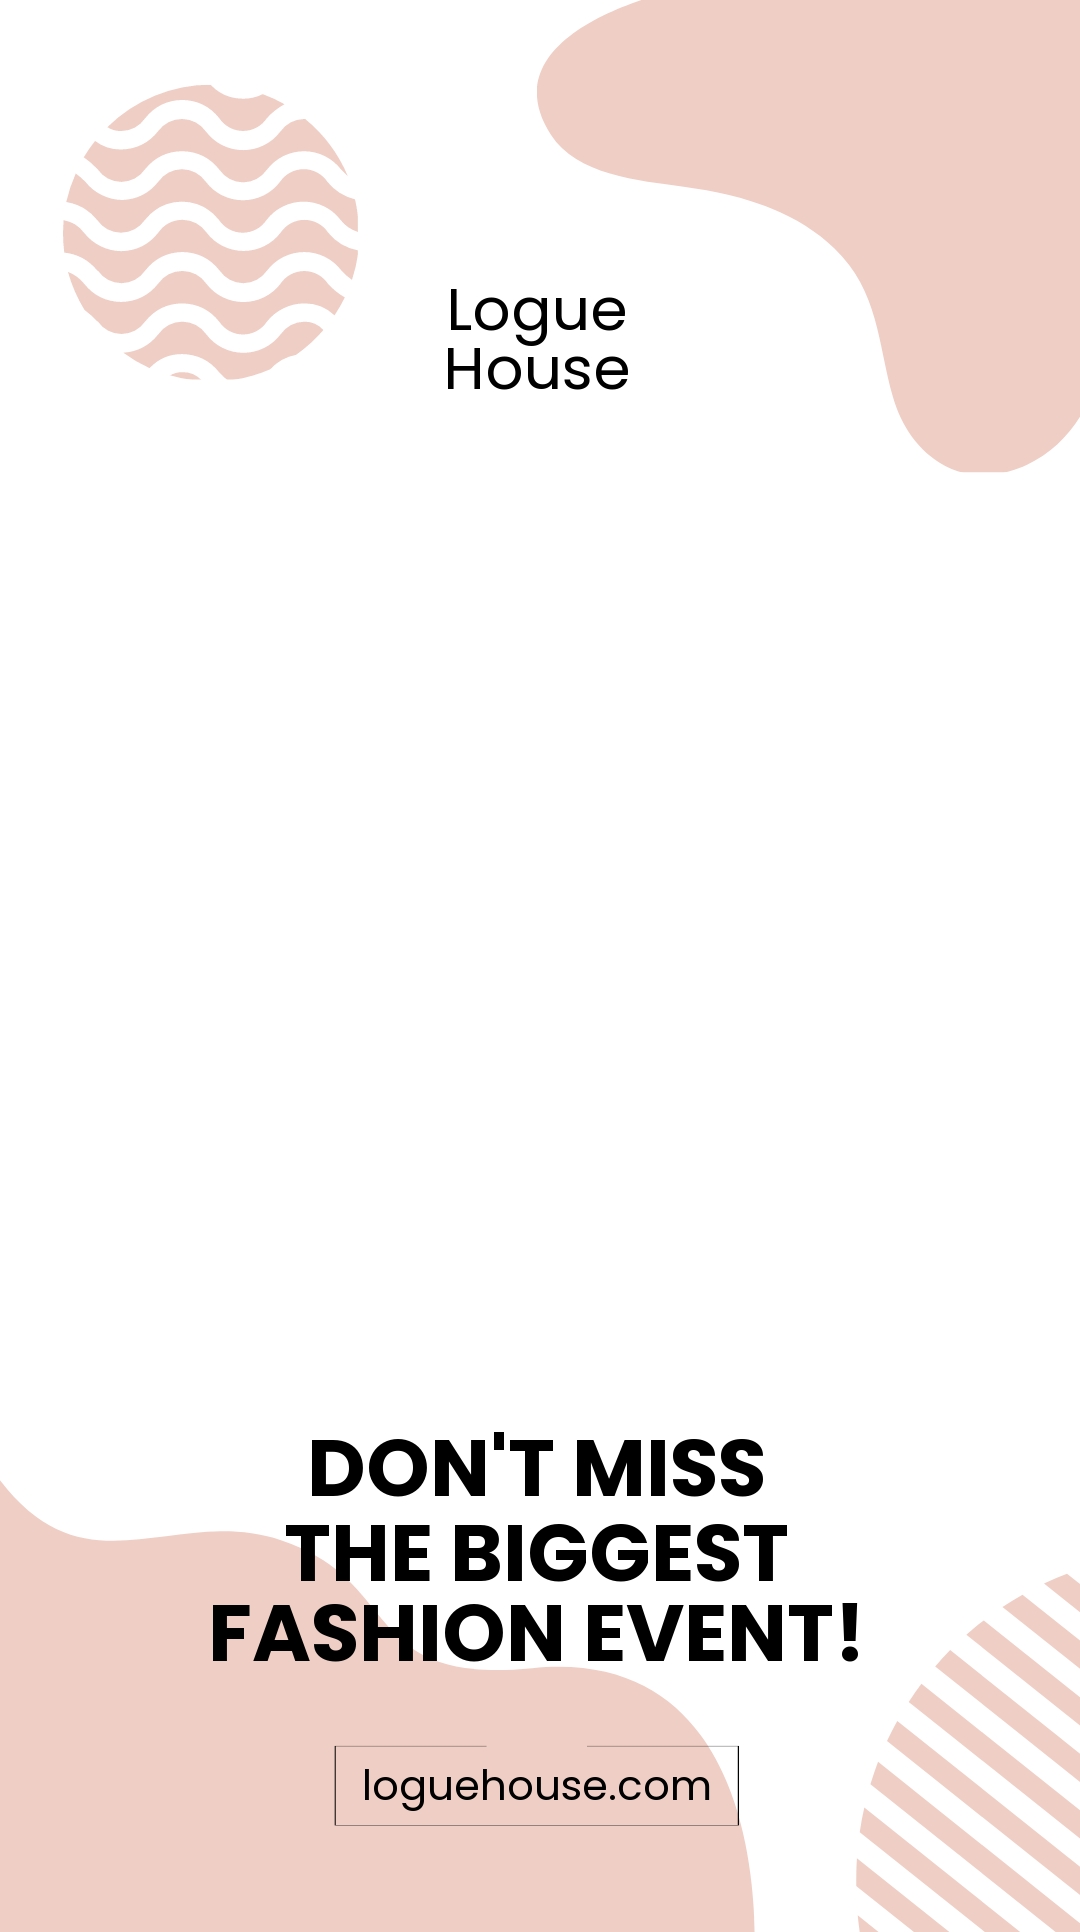 Free Fashion Campaign Snapchat Geofilter Template